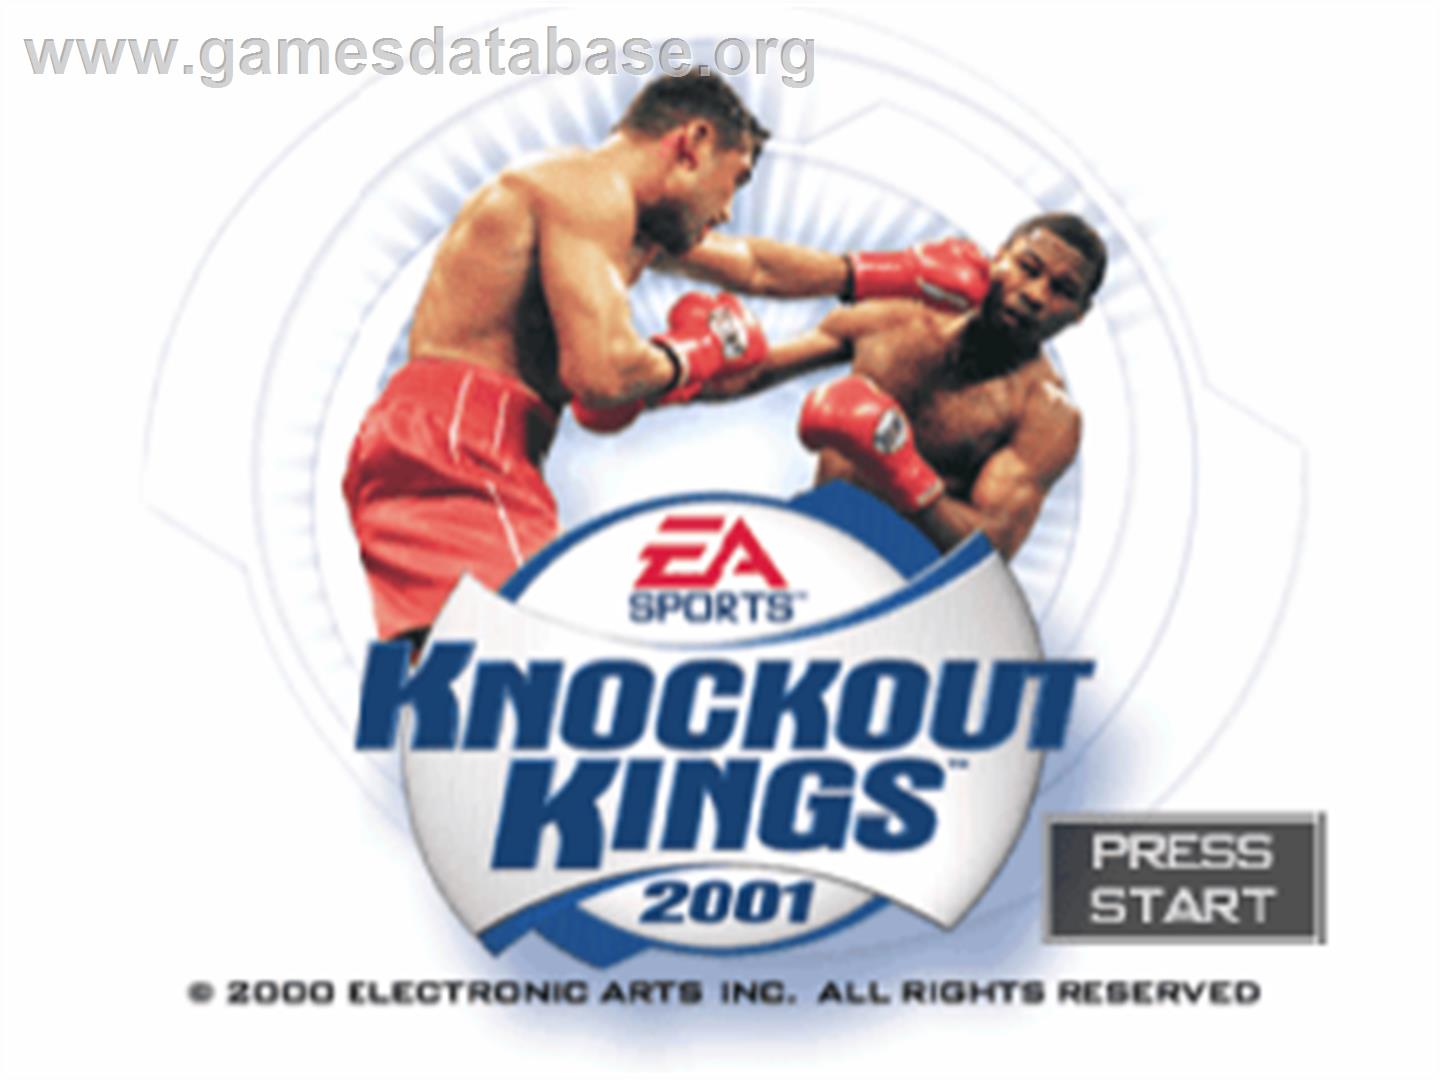 Knockout Kings 2001 - Sony Playstation - Artwork - Title Screen